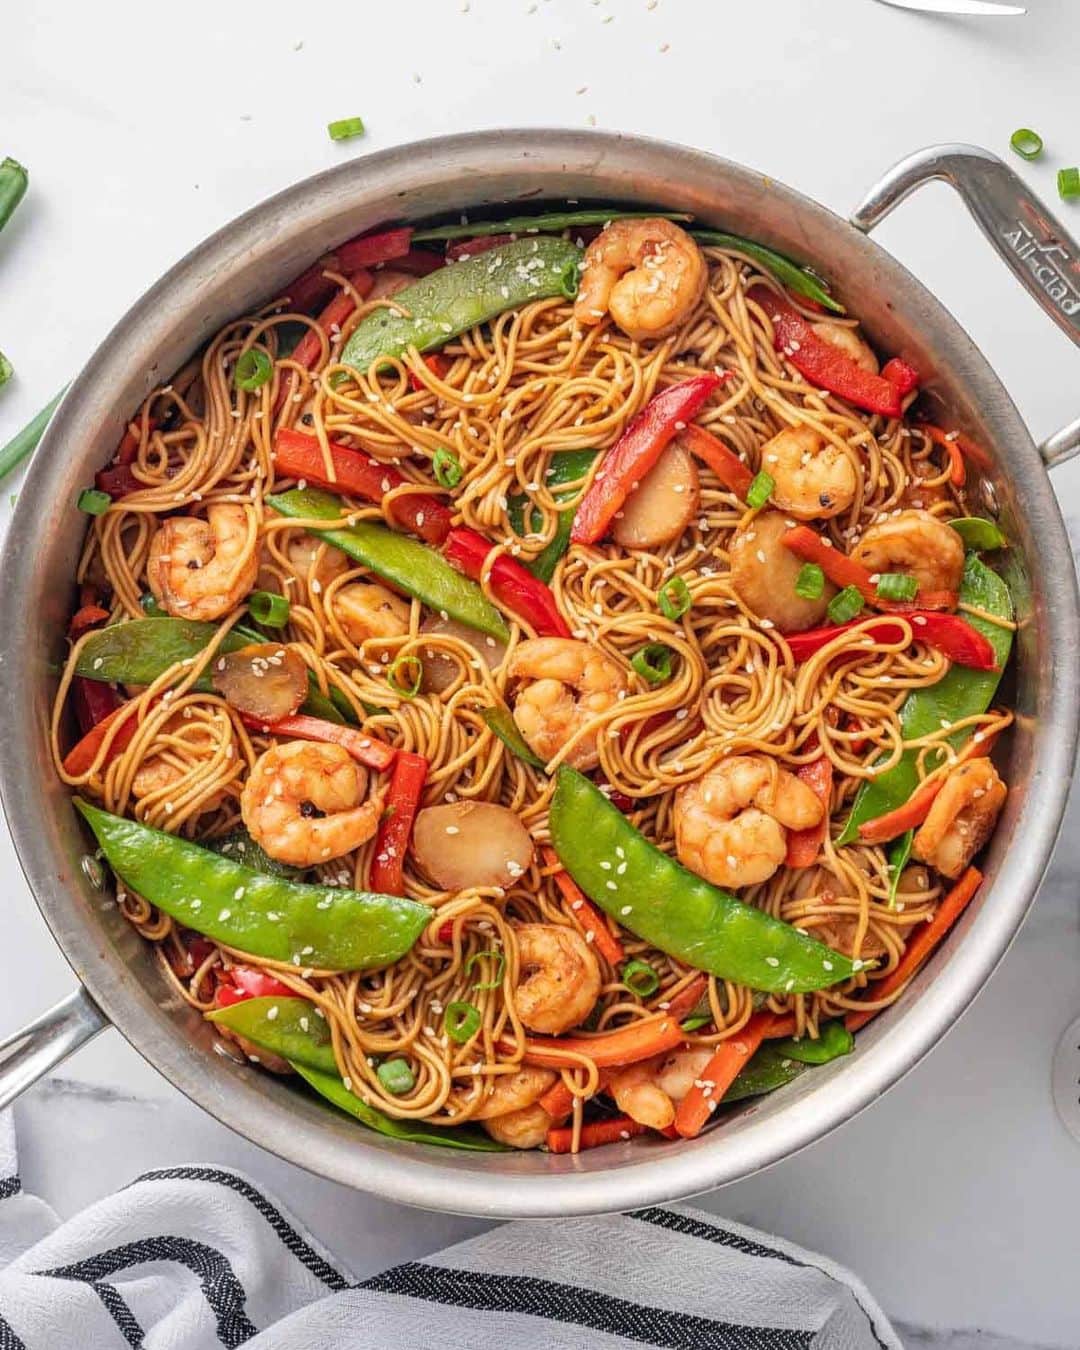 Easy Recipesのインスタグラム：「Shrimp Lo Mein is a well-loved take-out staple. Making these tasty shrimp noodles at home is so easy and affordable. It can be customized with the vegetables and protein you have on hand and ingredients in your pantry. It’s the perfect recipe to have on hand when you are in a hurry or don’t know what to cook.  Full recipe link in my bio @cookinwithmima  https://www.cookinwithmima.com/shrimp-lo-mein/」